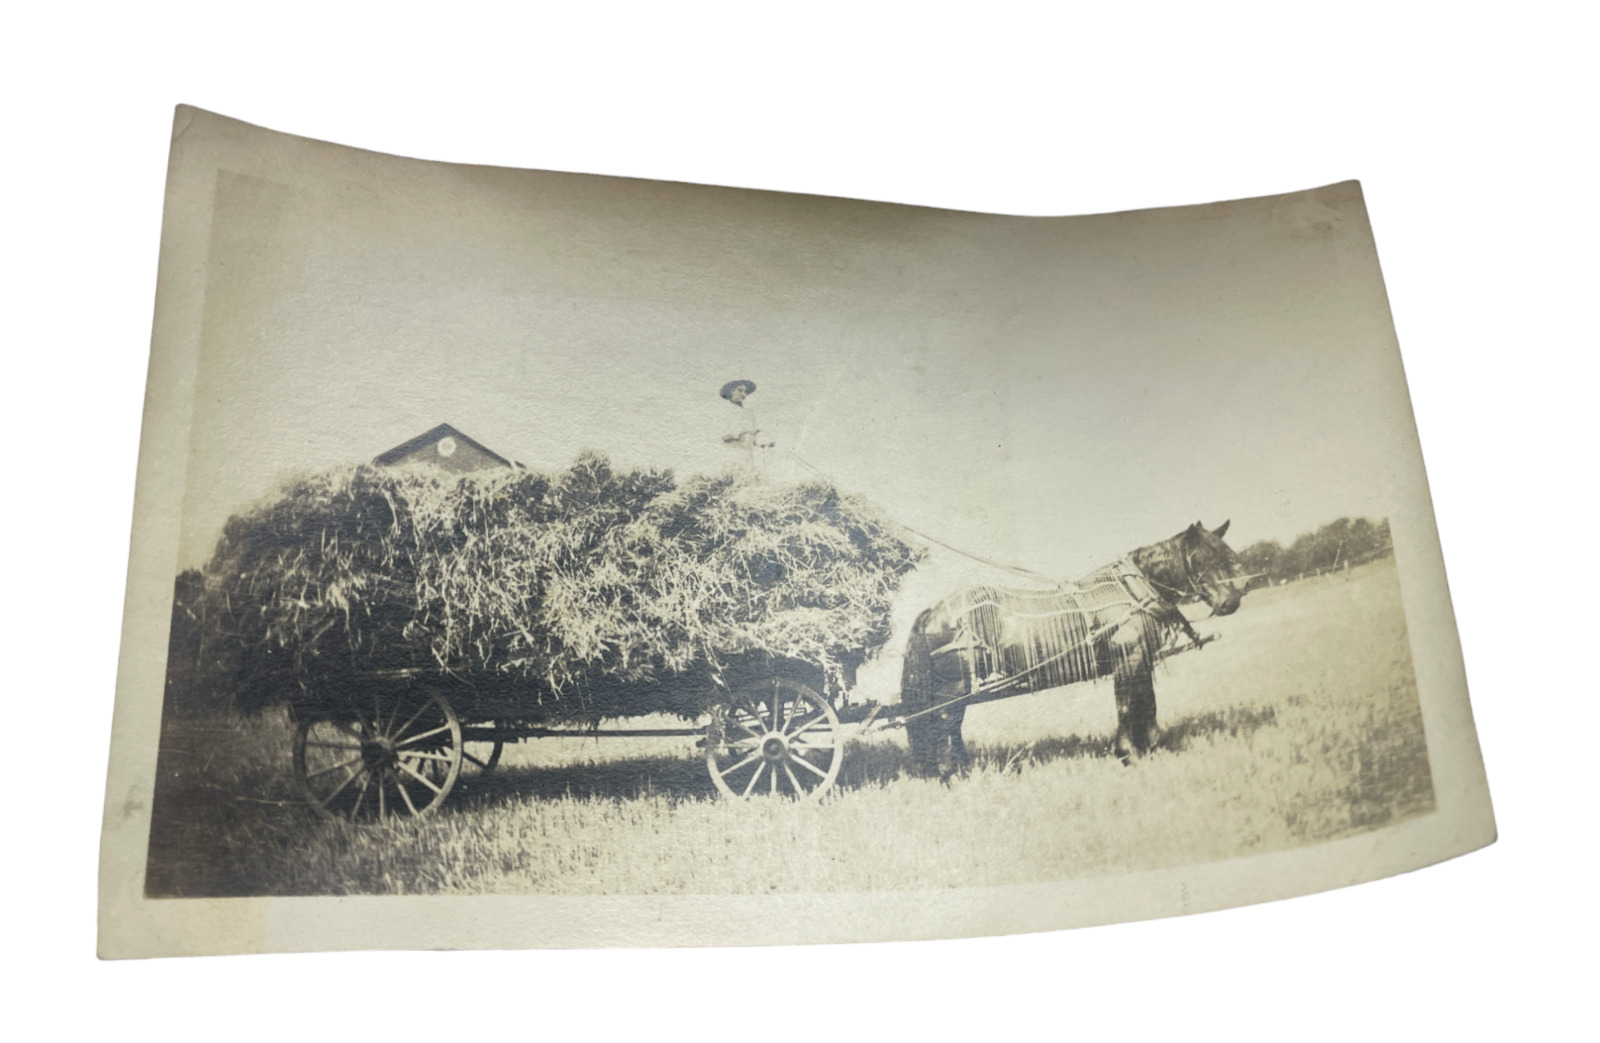 Rural Farm Field Horse Pulled Hay Wagon Working Photo c1920